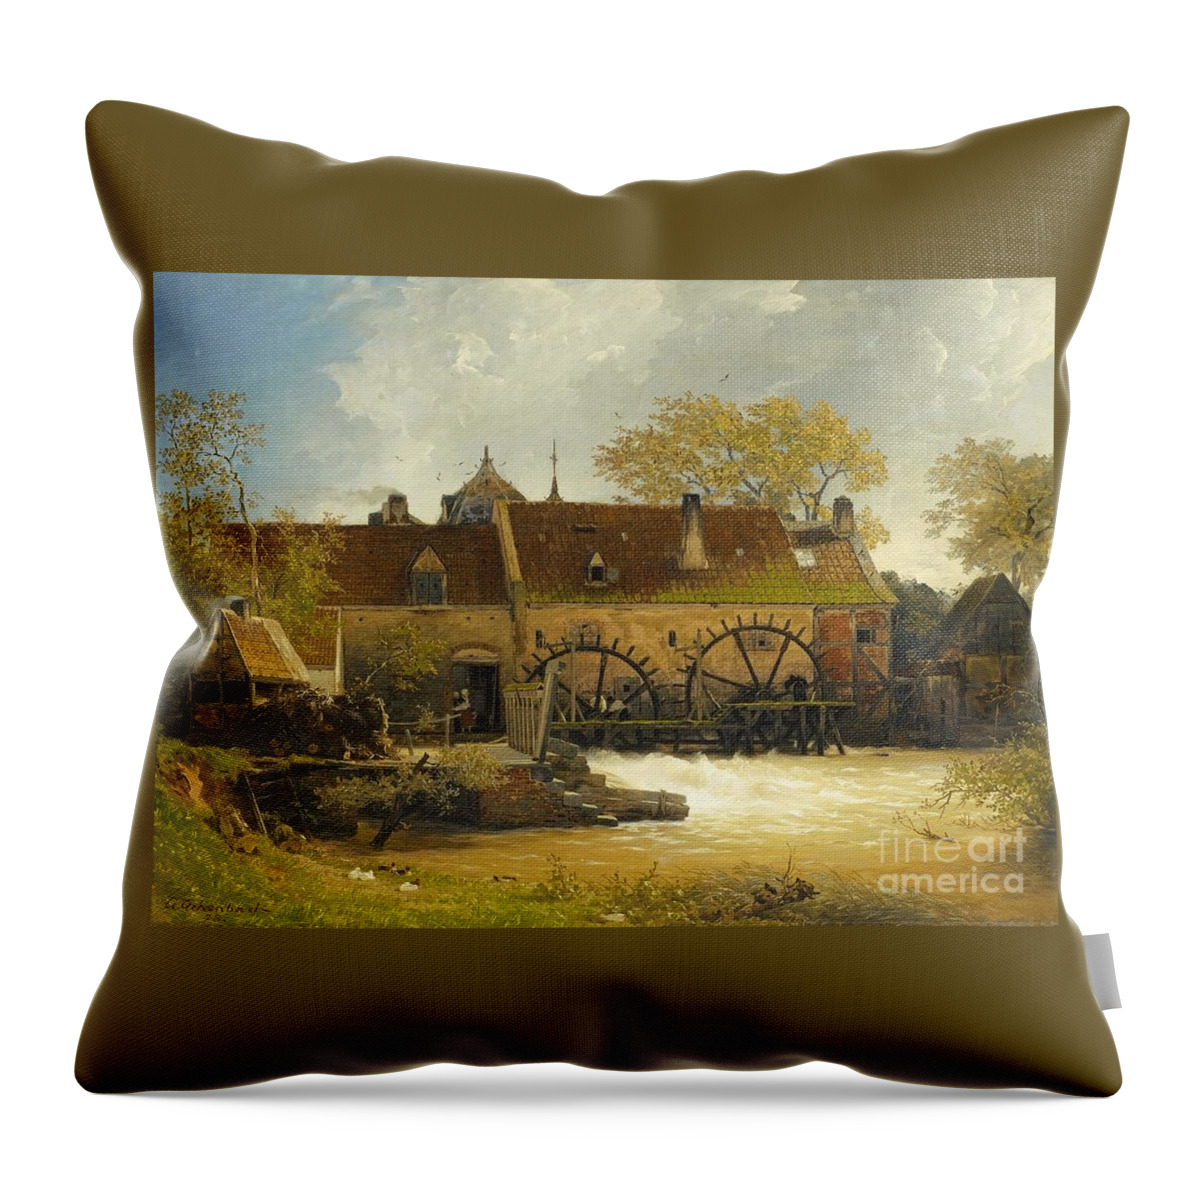 Andreas Achenbach Throw Pillow featuring the painting Water-mill At A River by MotionAge Designs